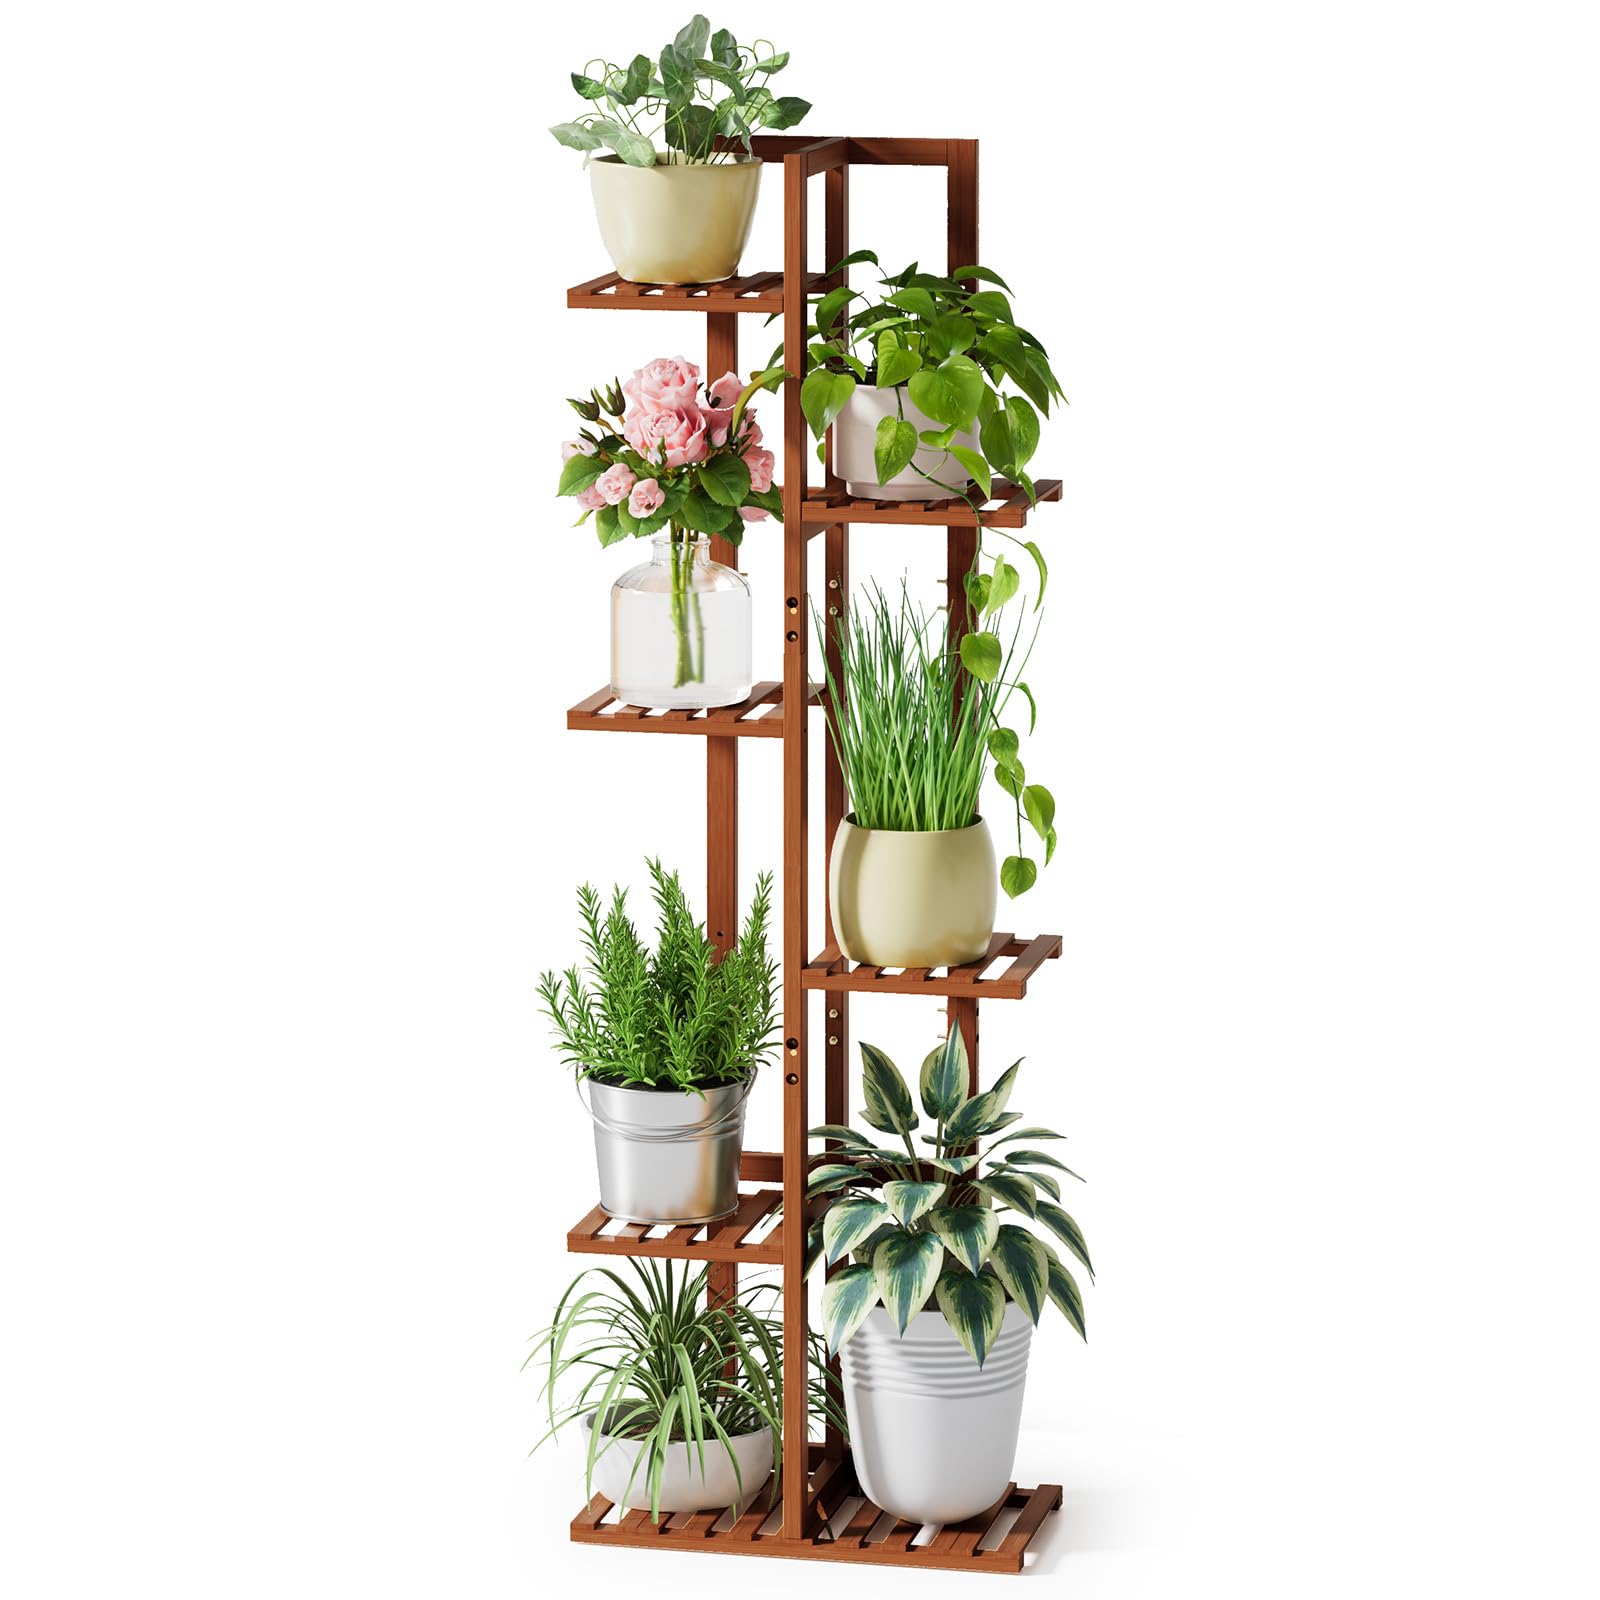 ROSSNY Plant Stand Indoor